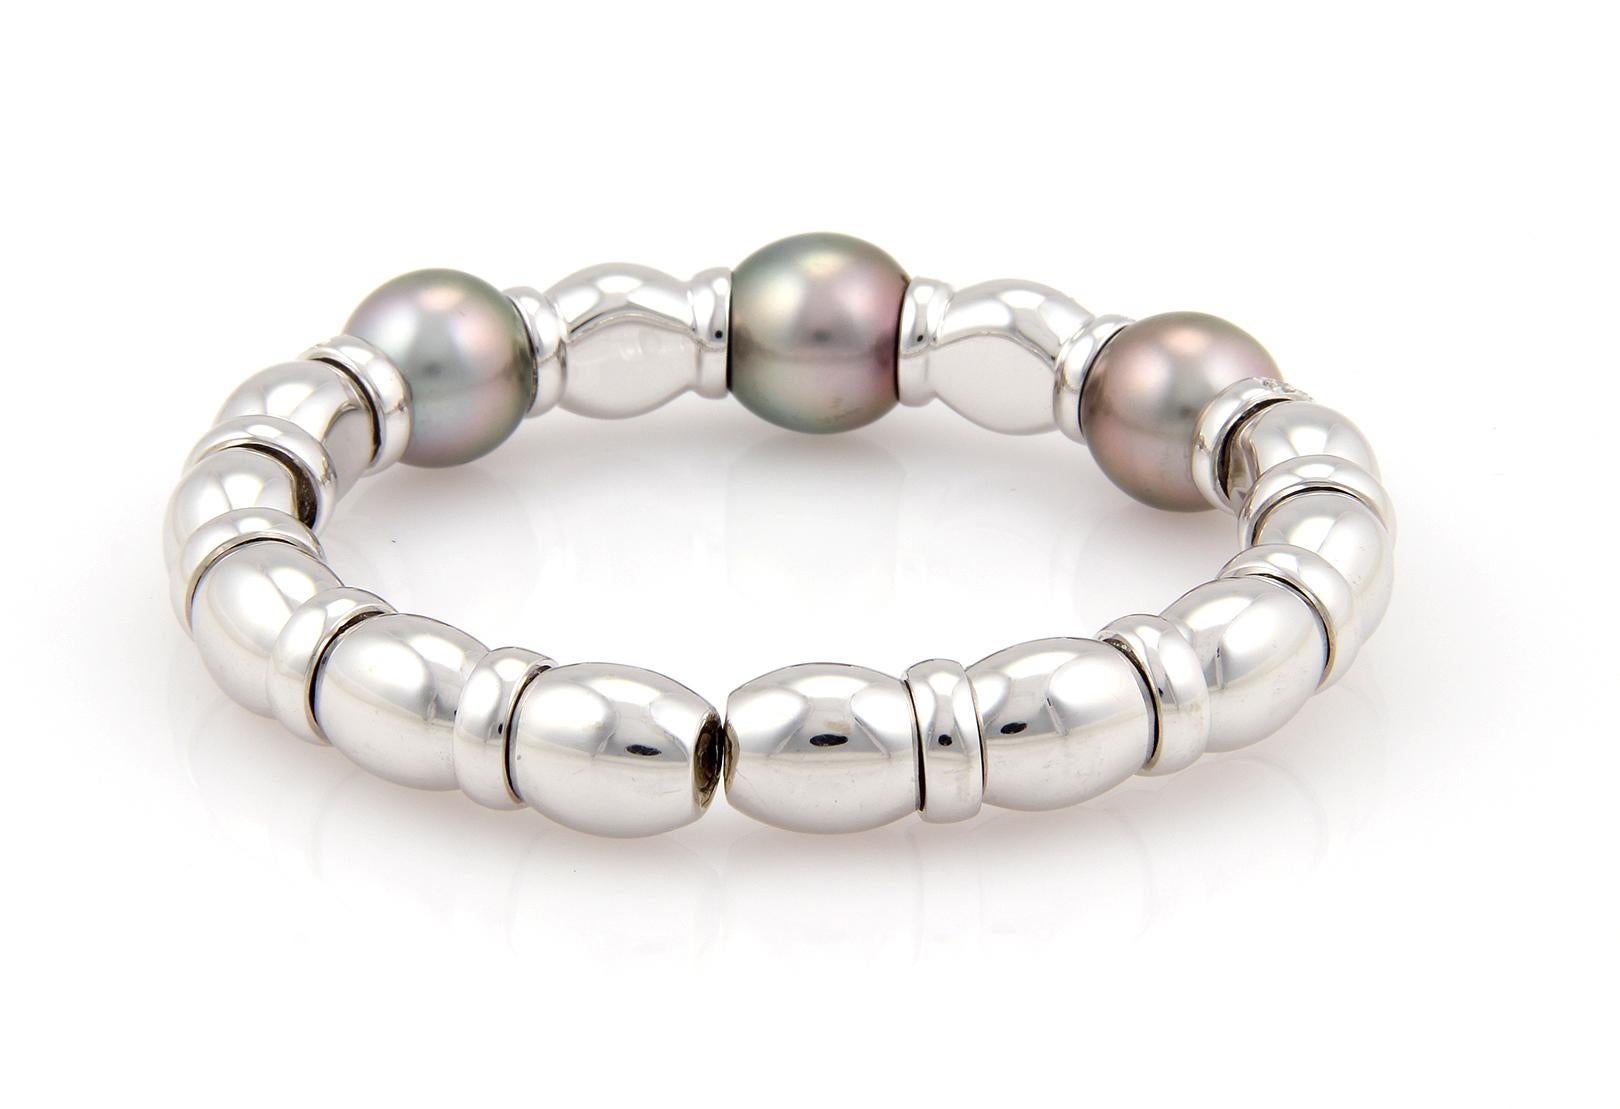 Diamond South Sea Grey Pearls 18k White Gold Fancy Cuff Bracelet In Excellent Condition For Sale In Boca Raton, FL